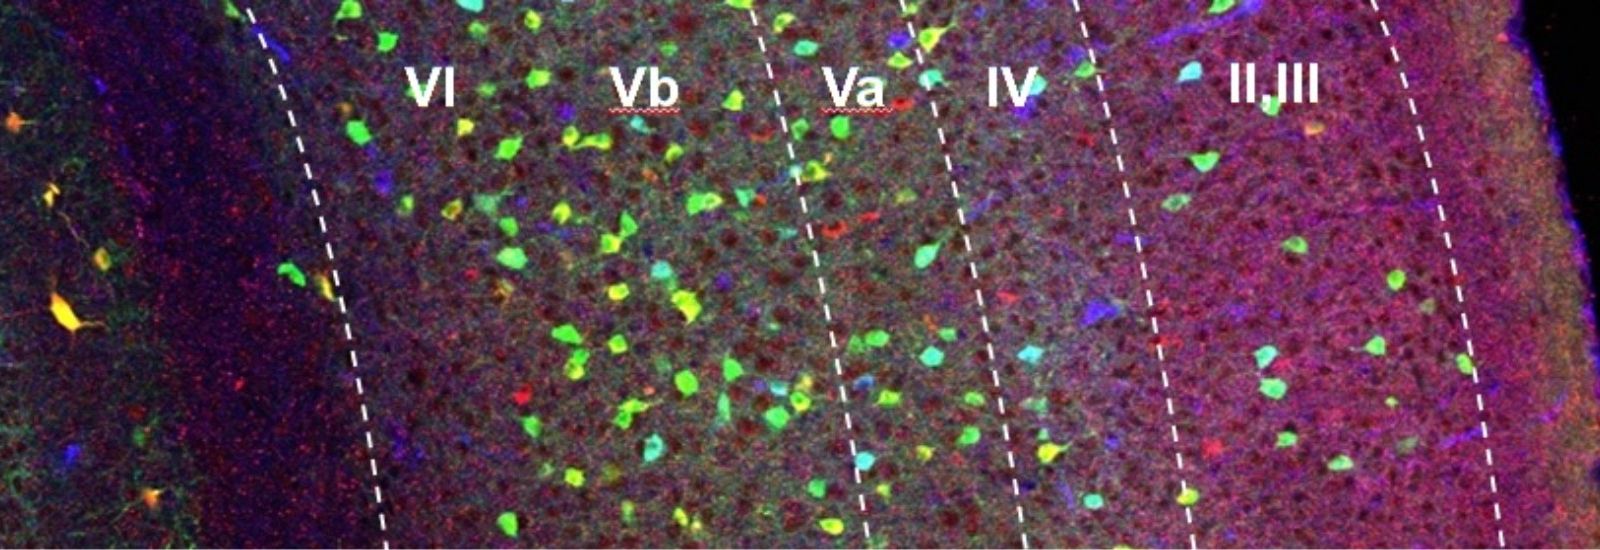 Close up of a image of Inhibitory interneurons